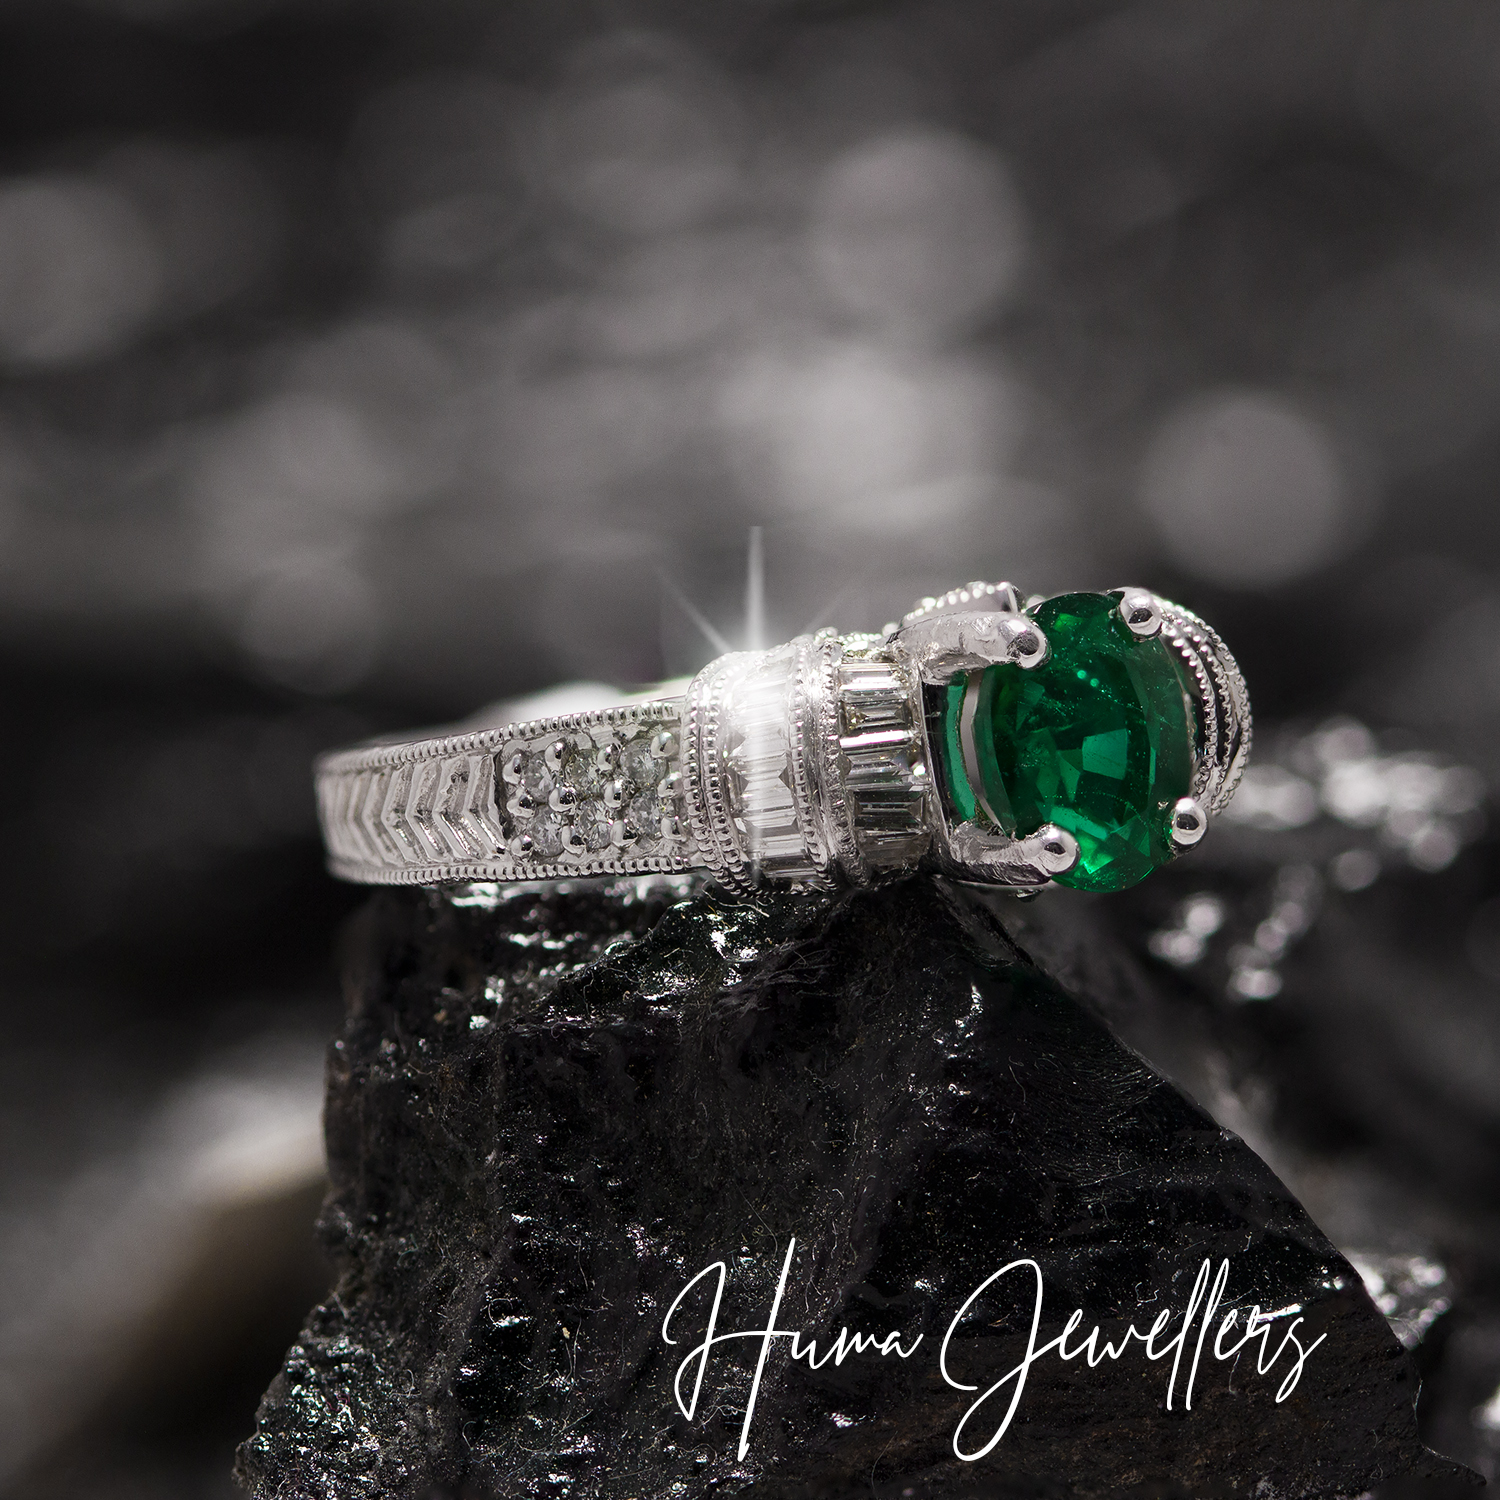 wedding engagement ring in solitaire style with green emerald stone with baguettes and round diamonds at huma jewellers karachi pakistan